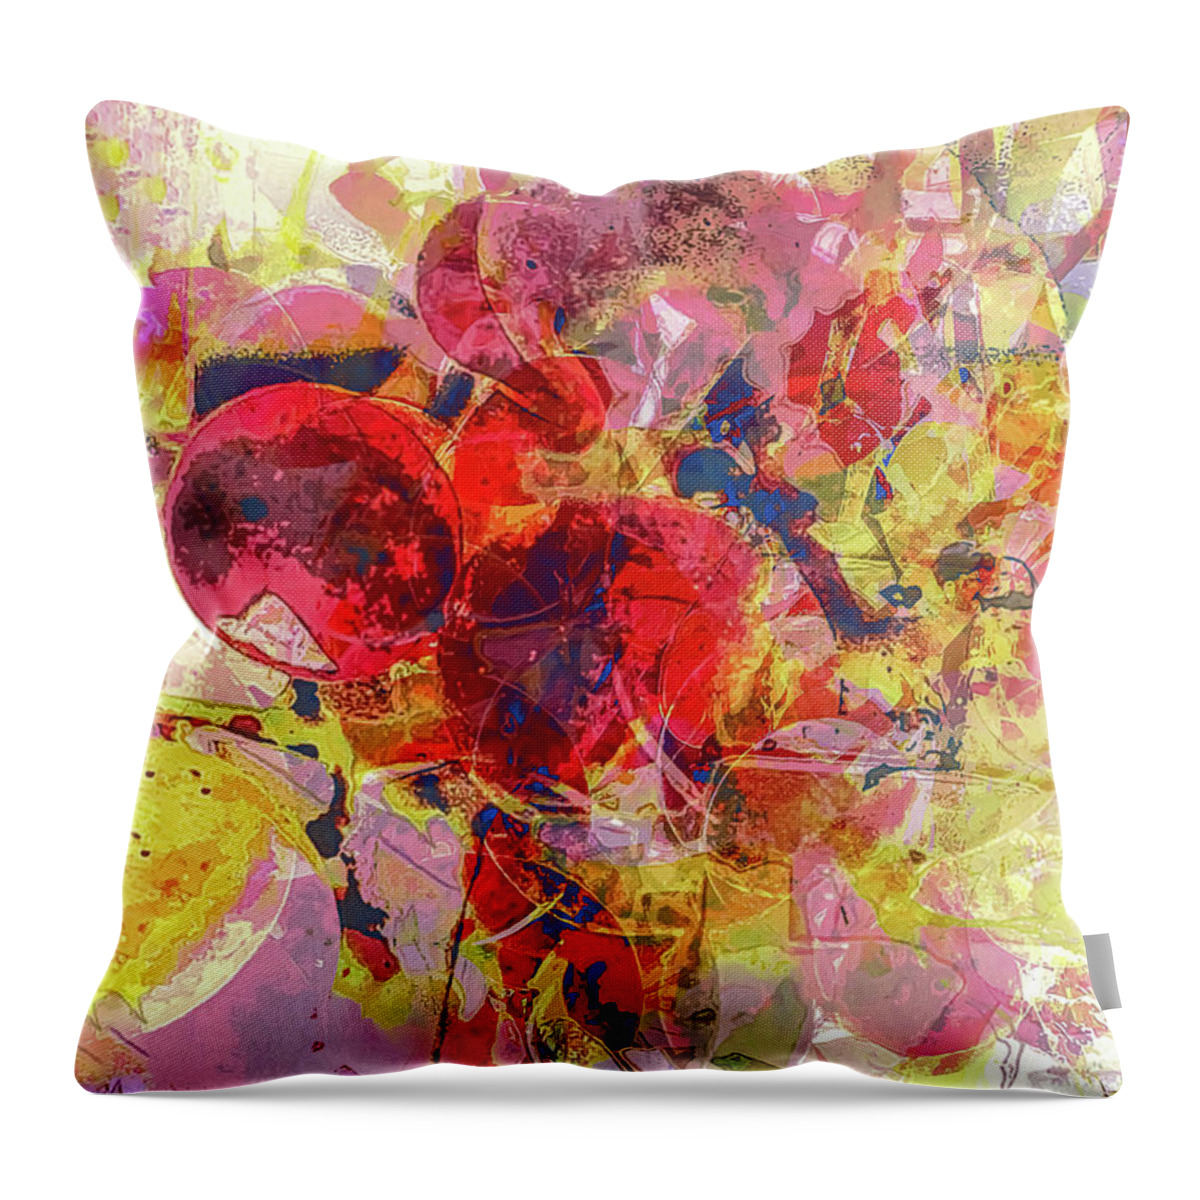 Abstract Throw Pillow featuring the digital art Copmosition 1 by Ch I